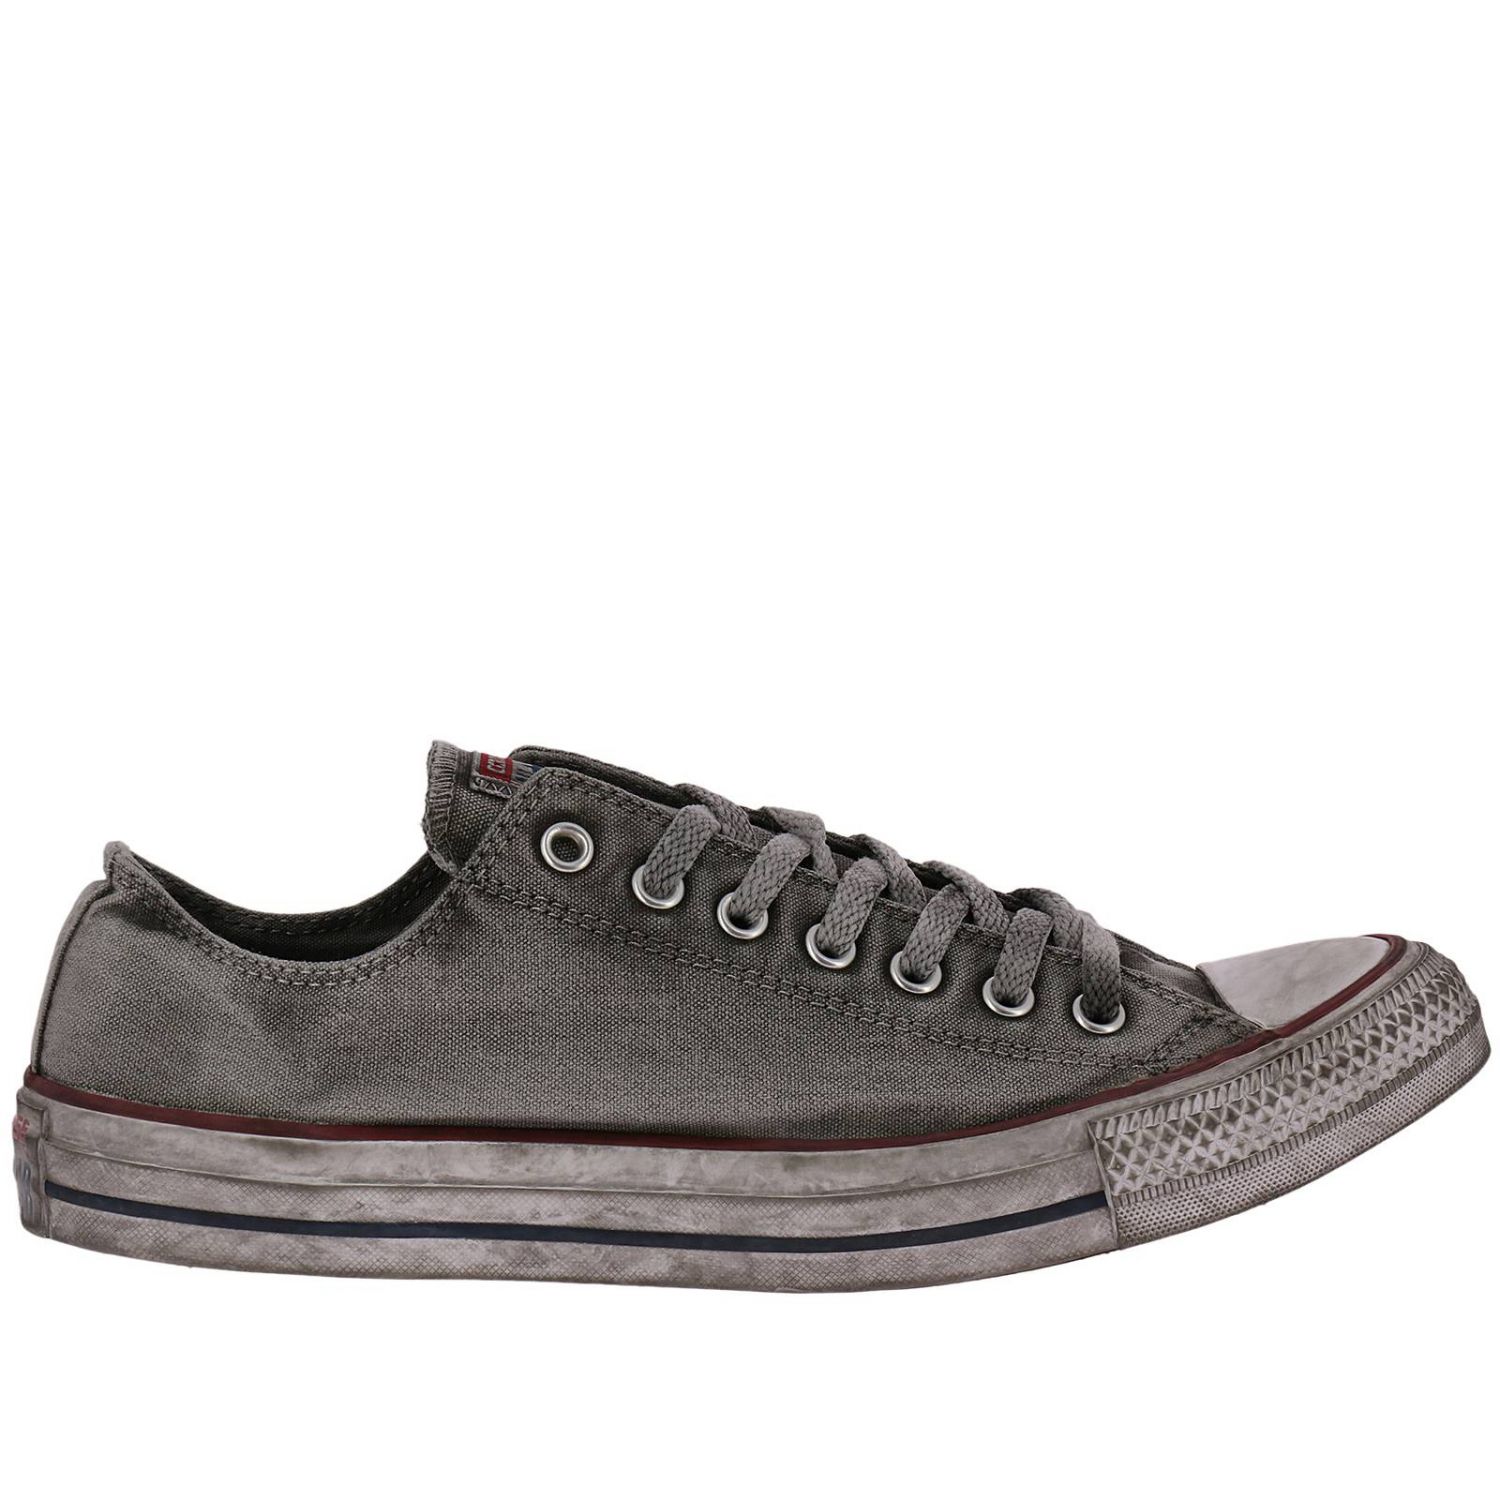 converse bianche limited edition 2015